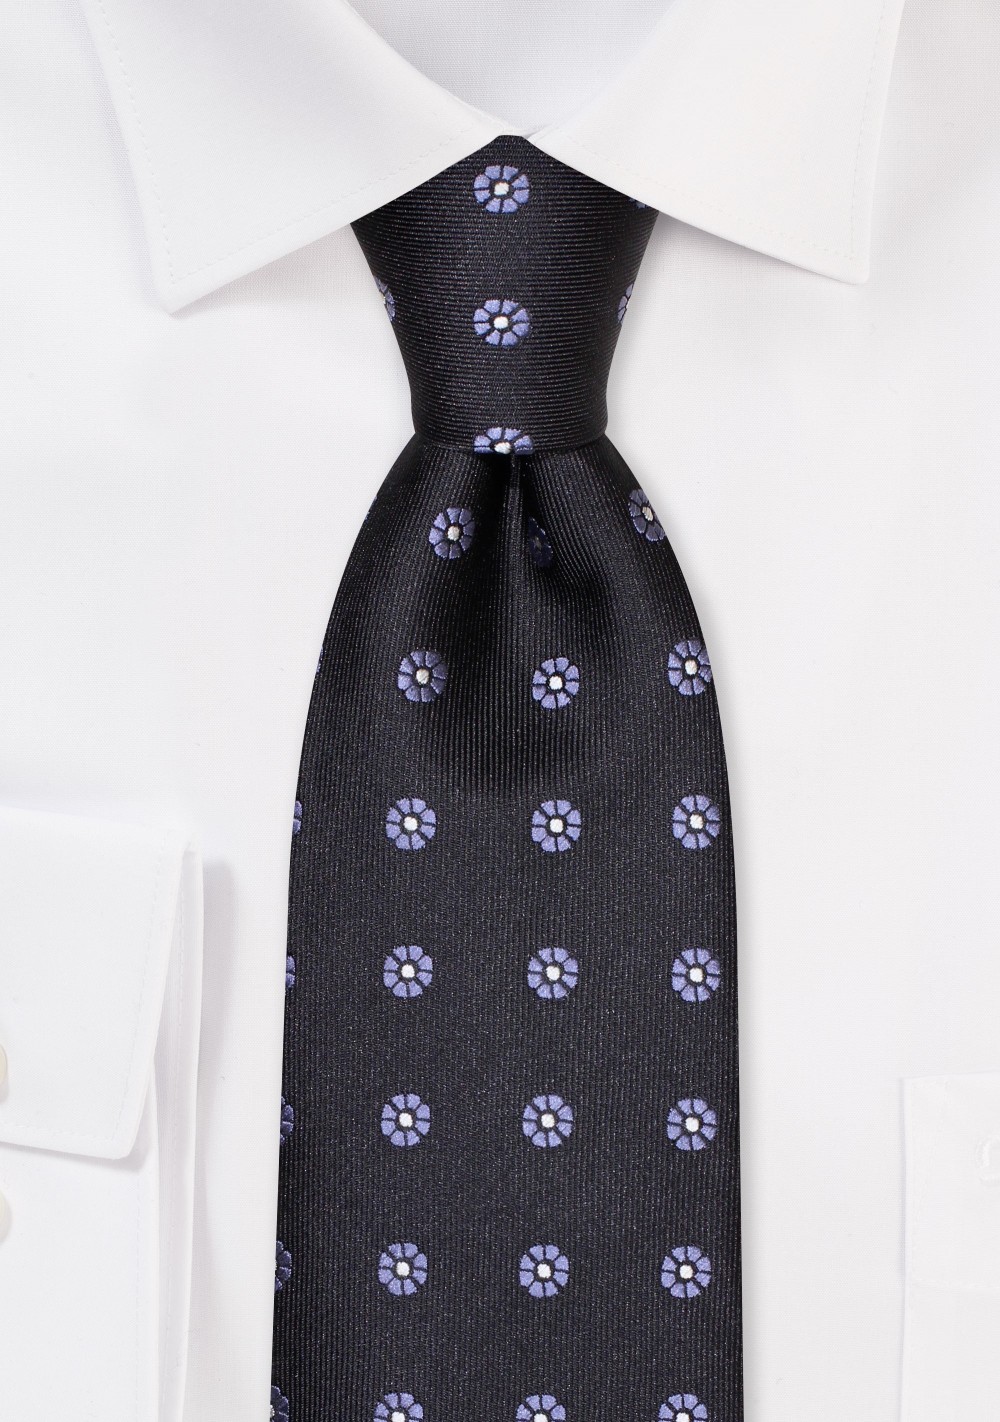 Black Tie with Small Embroidered Floral Dots